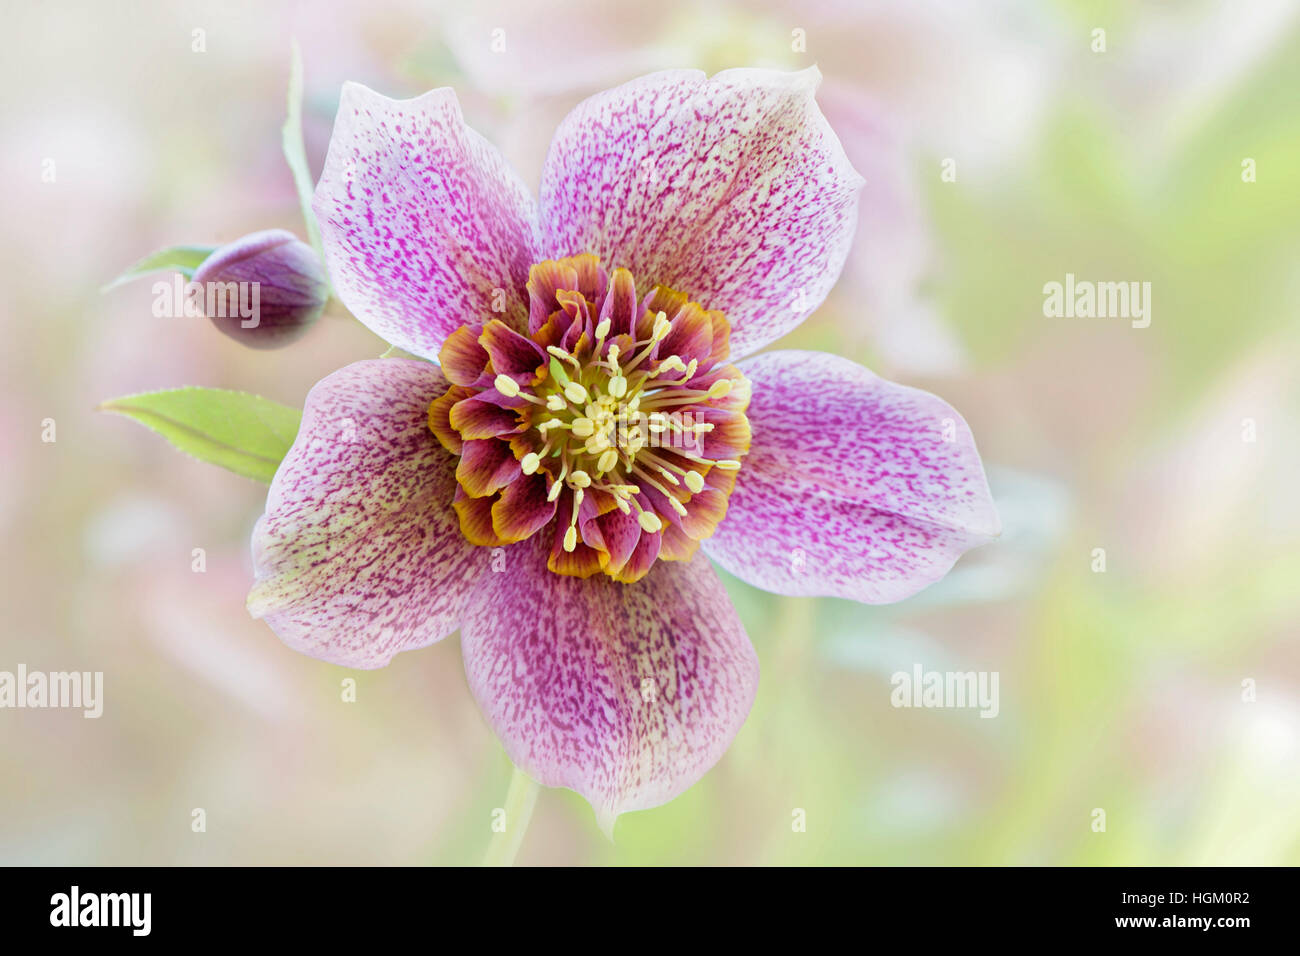 Spring Flowering Hellebore flower also known as the Lenten or Christmas Rose, image taken against a soft background. Stock Photo